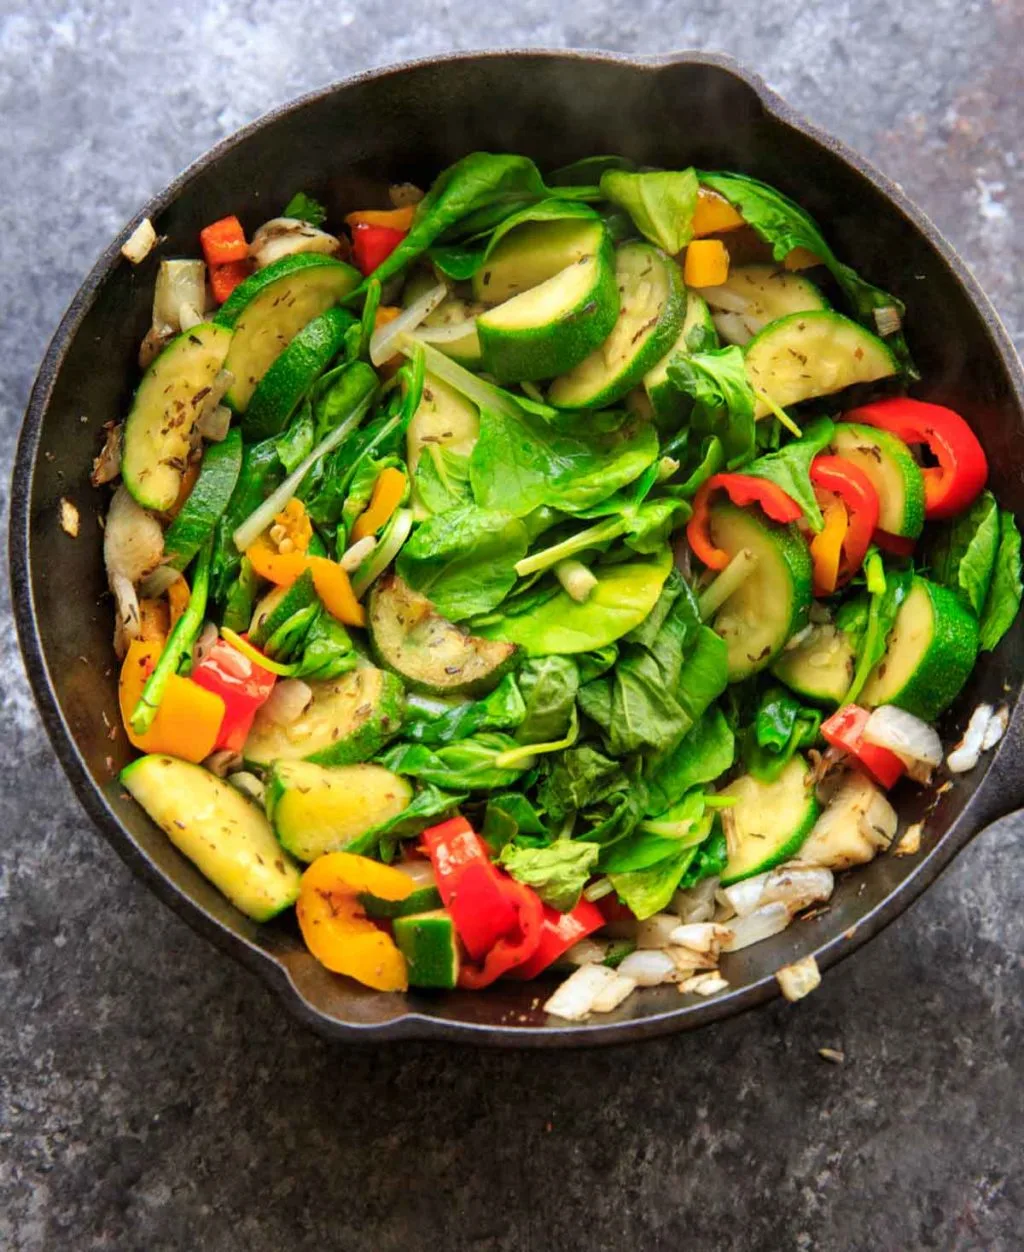 Sauteed vegetables with zucchini, onion, mini sweet peppers and spinach